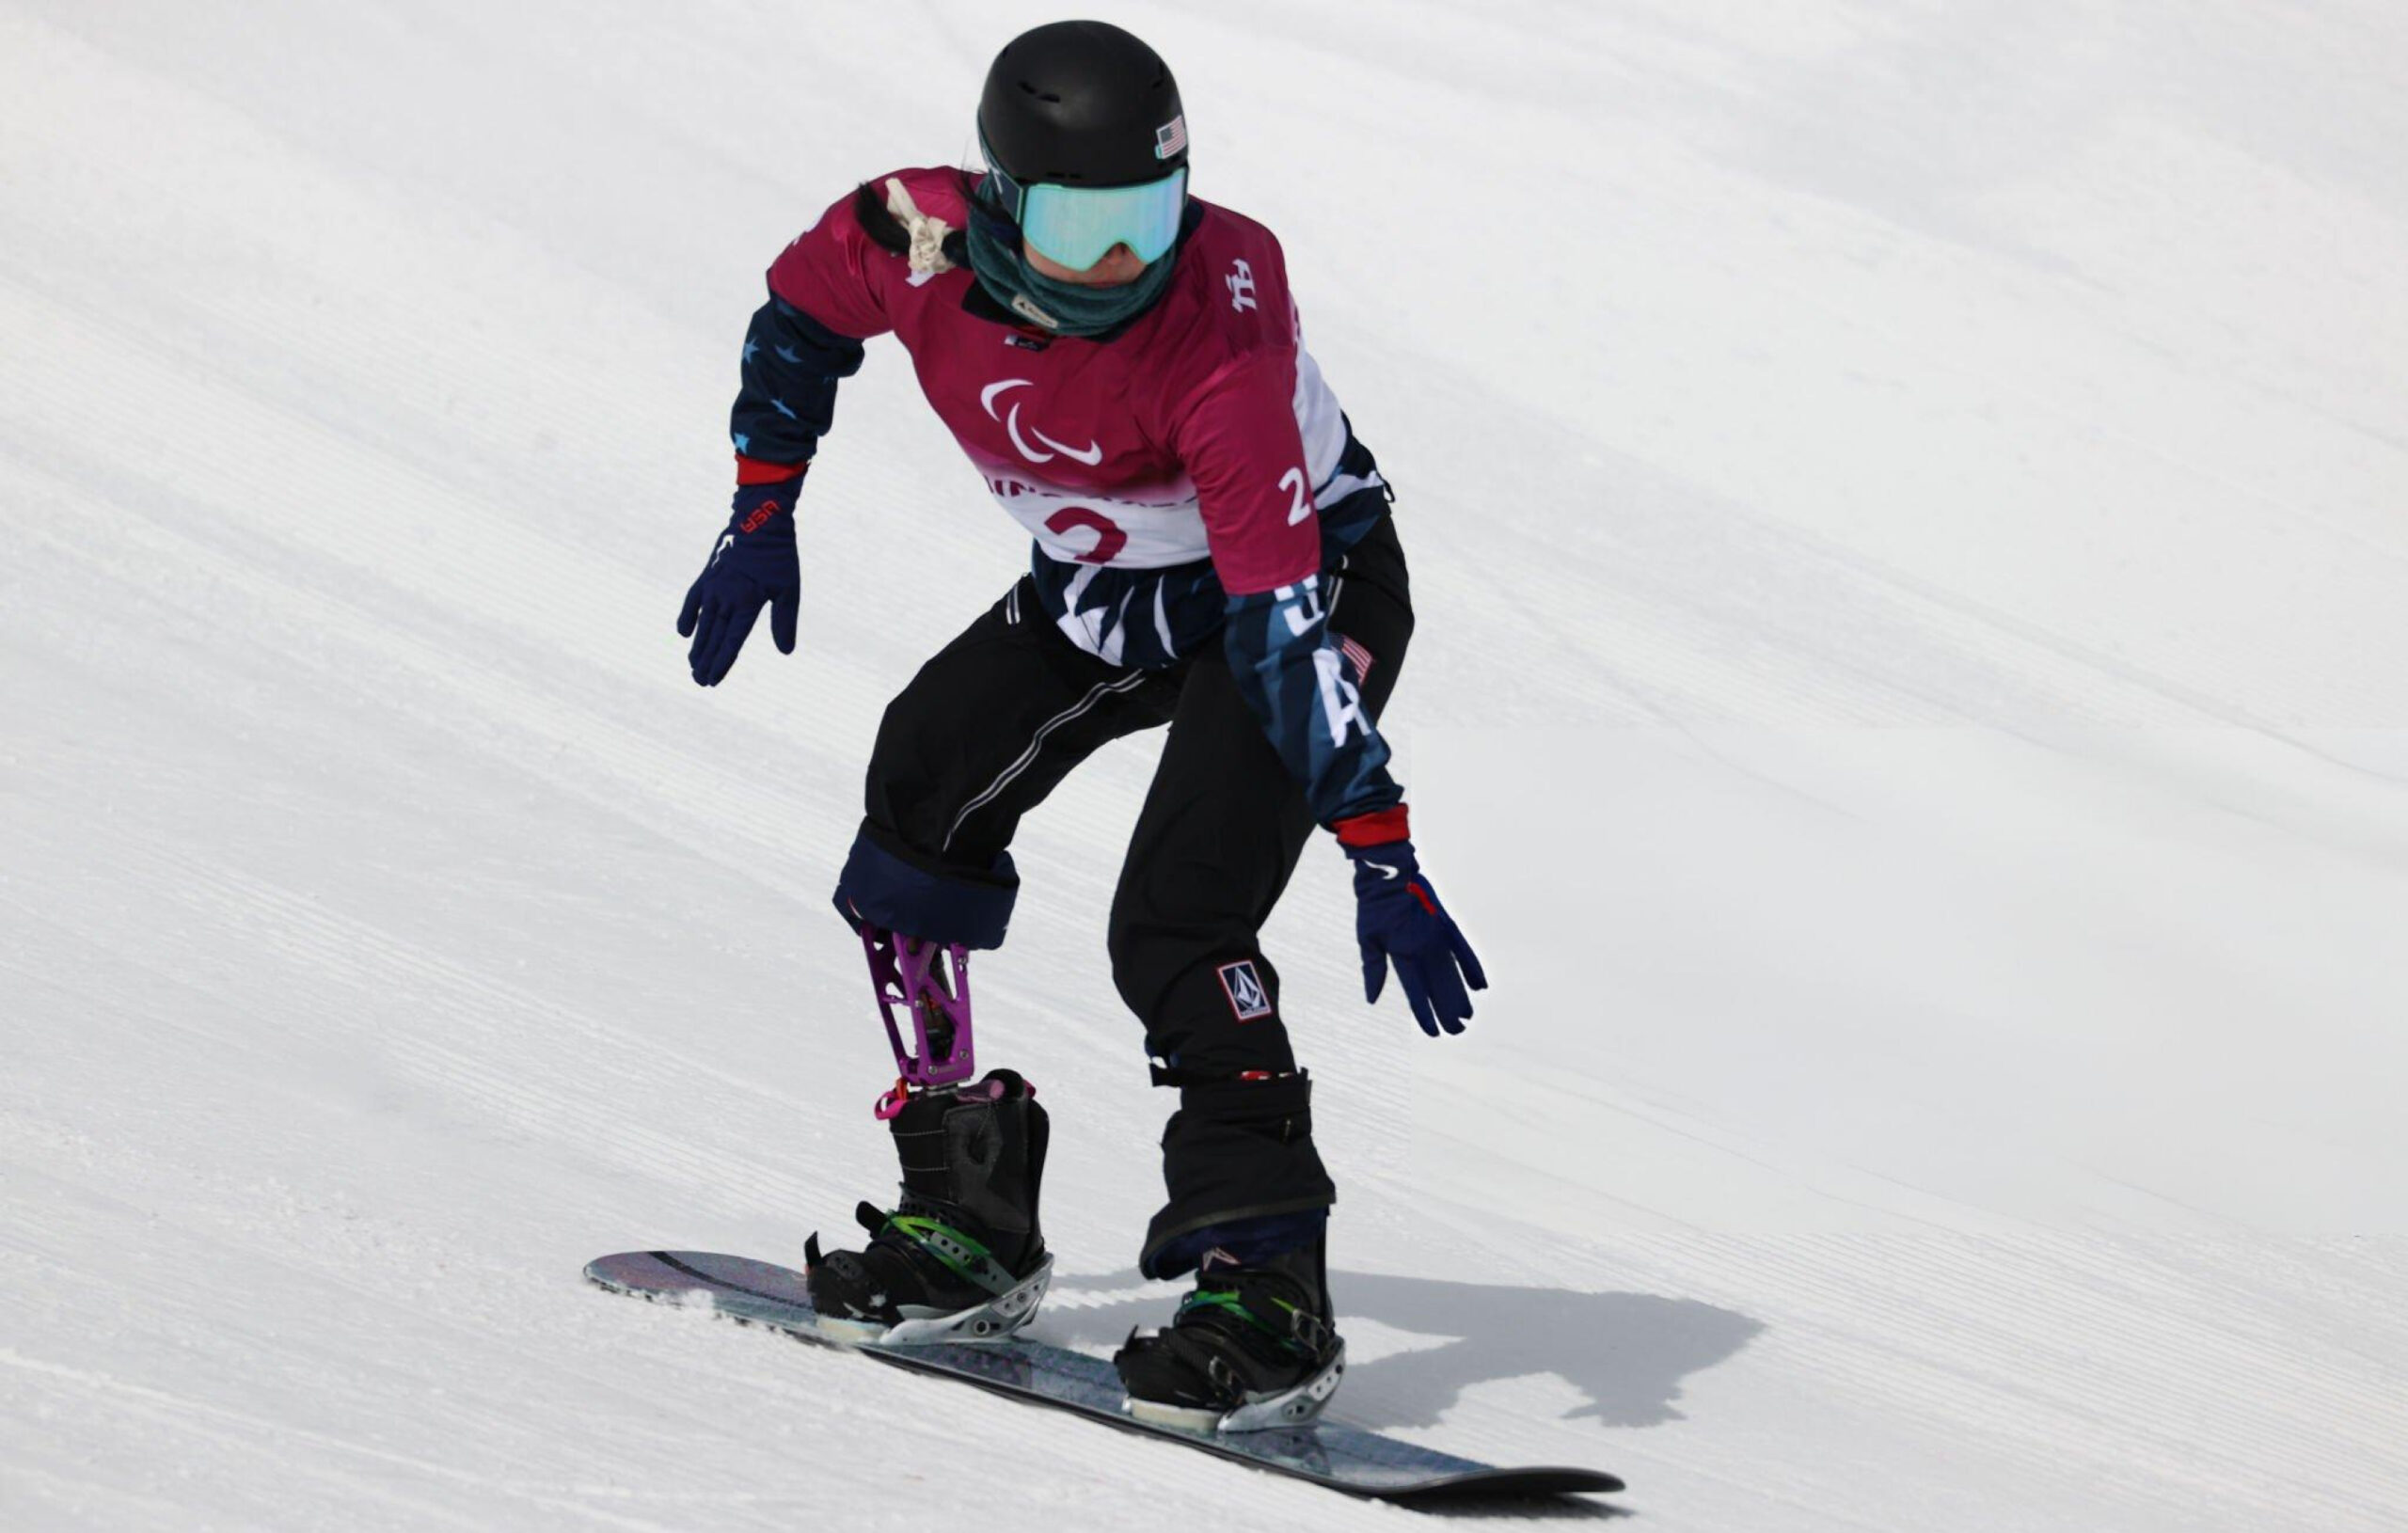 Brenna Huckaby during the Beijing 2022 Winter Paralympic Games at the Zhangjiakou Genting Snow Park in Zhangjiakou on March 6, 2022.